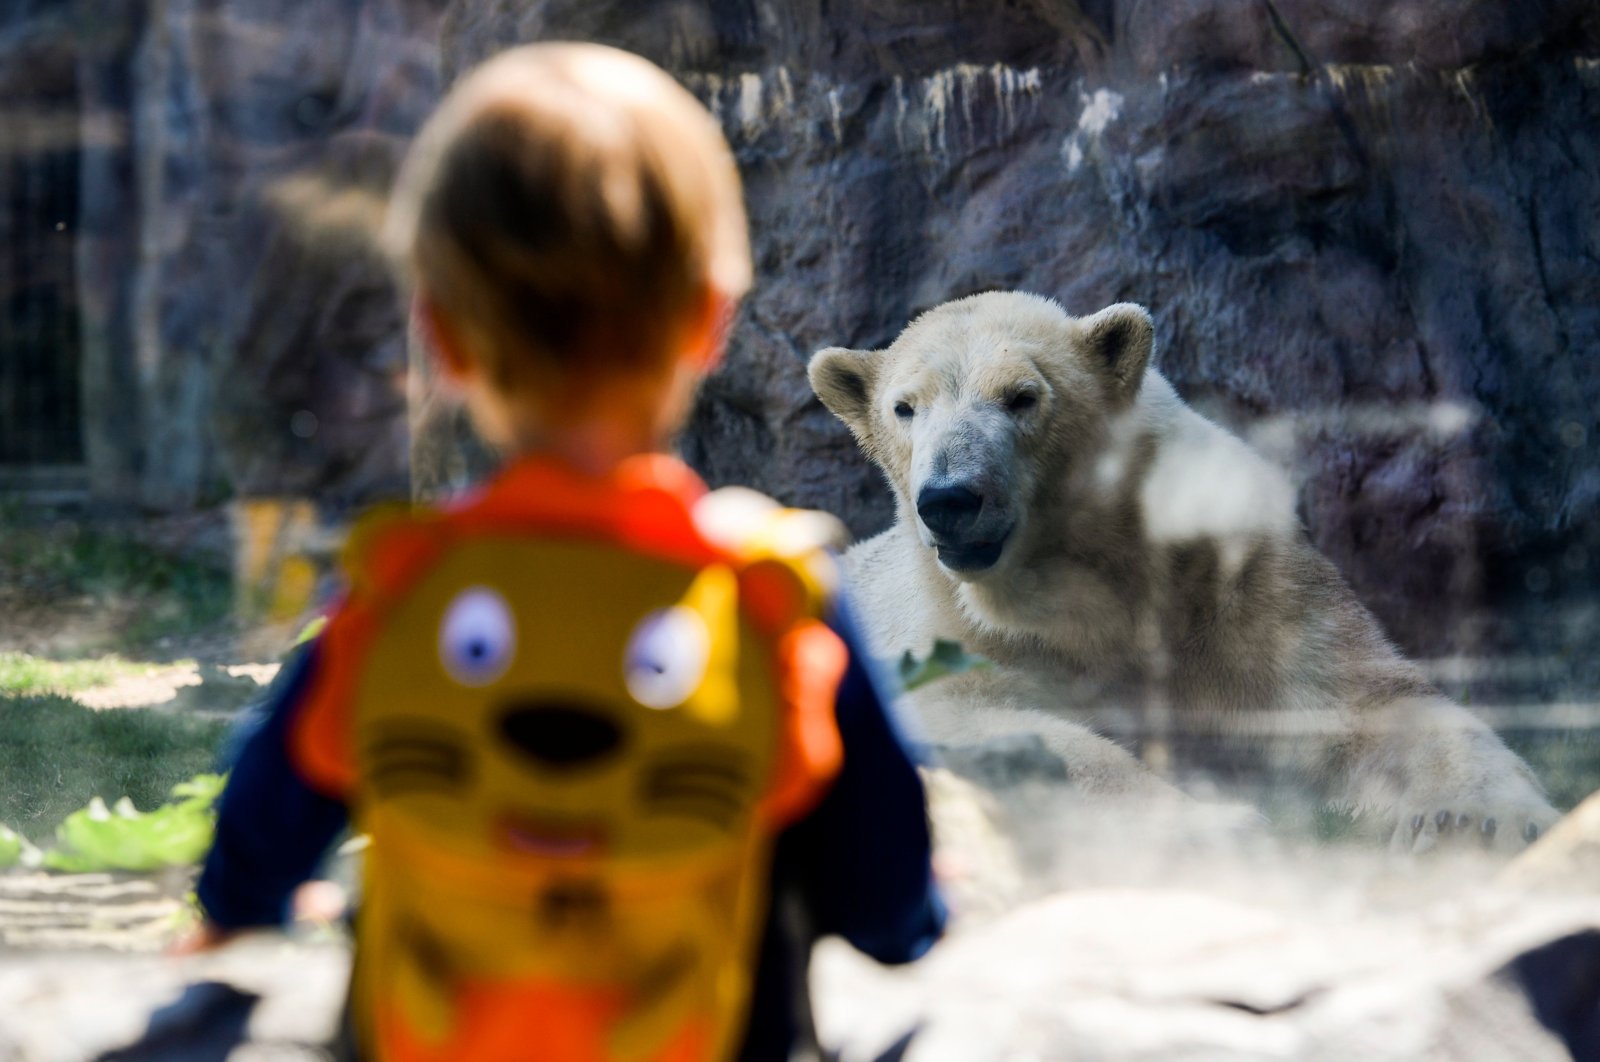 A child stands in front of a polar bear at the ZOOM Erlebniswelt Gelsenkirchen zoo, Gelsenkirchen, Germany, May 7, 2020. (AFP Photo)